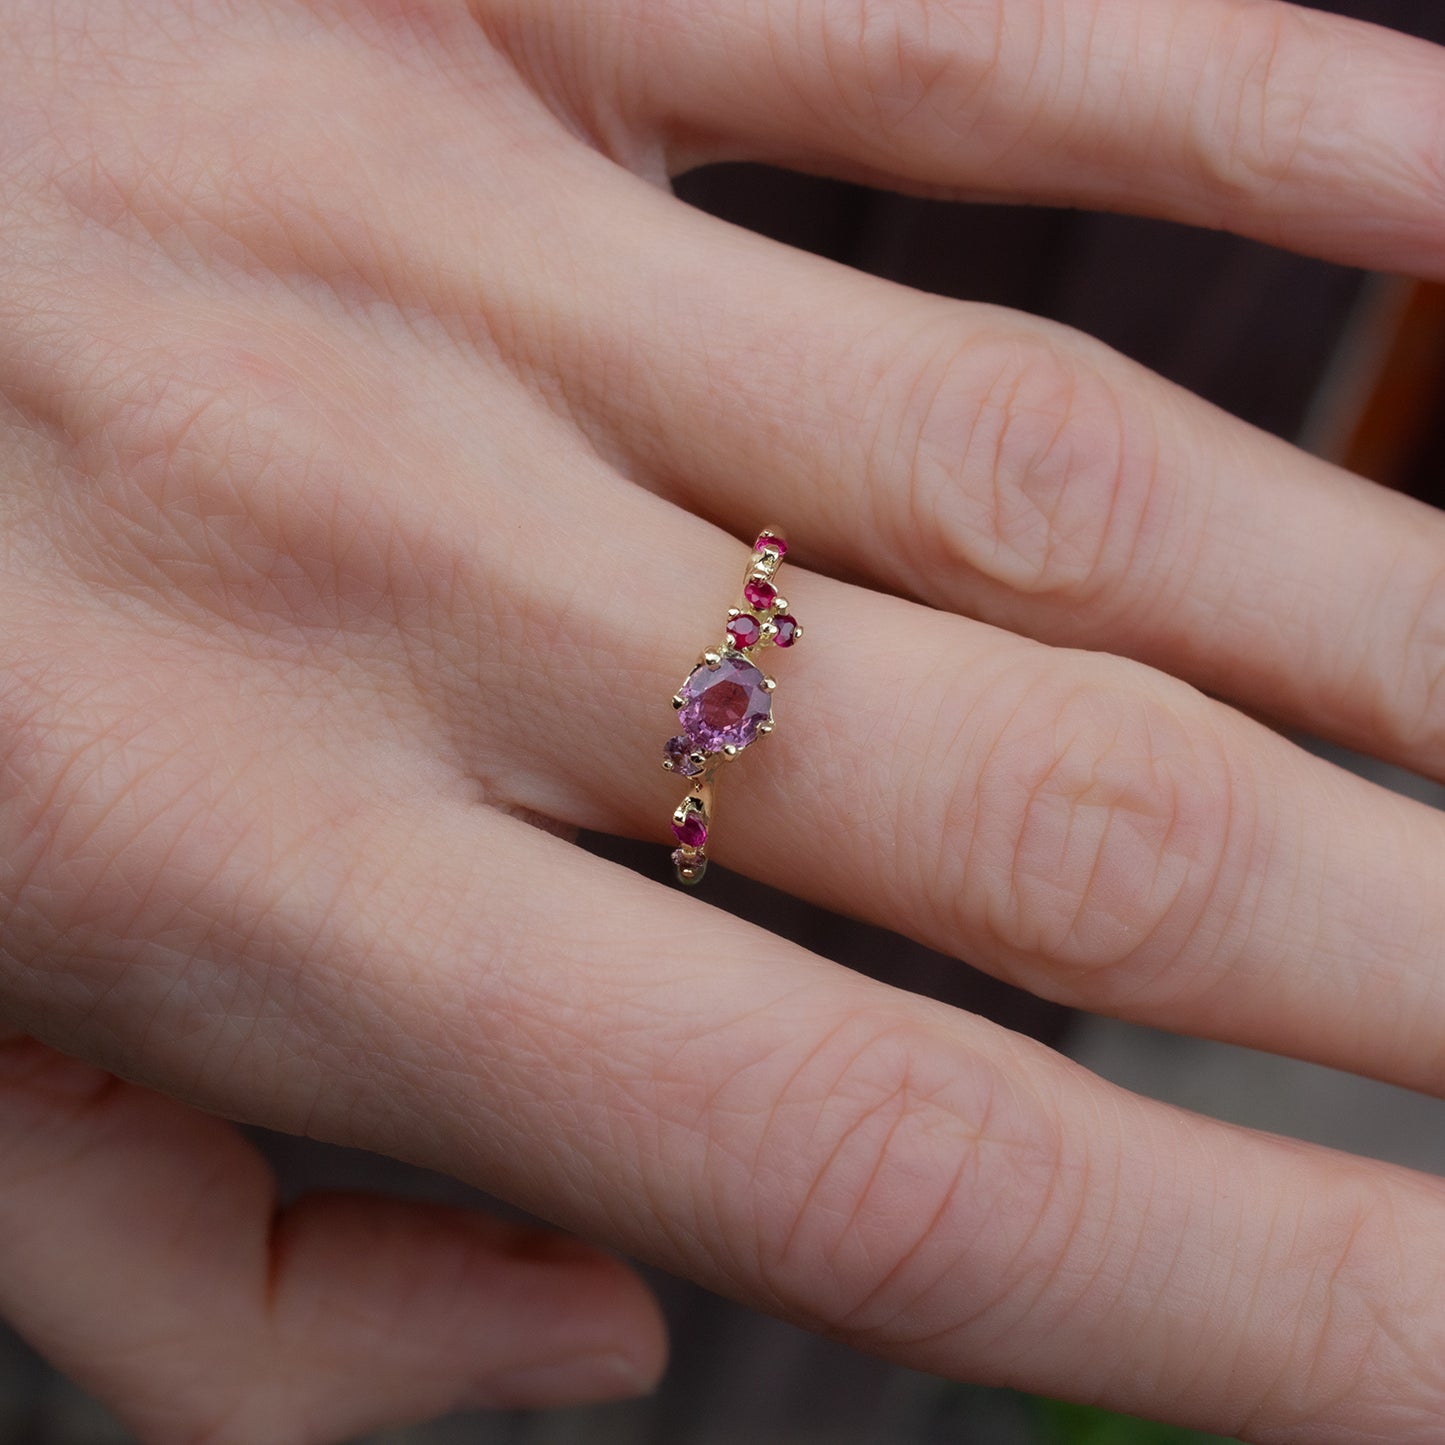 One Of A Kind Antheia II Ring - Padparadscha Sapphires And Rubies - Irena Chmura Jewellery